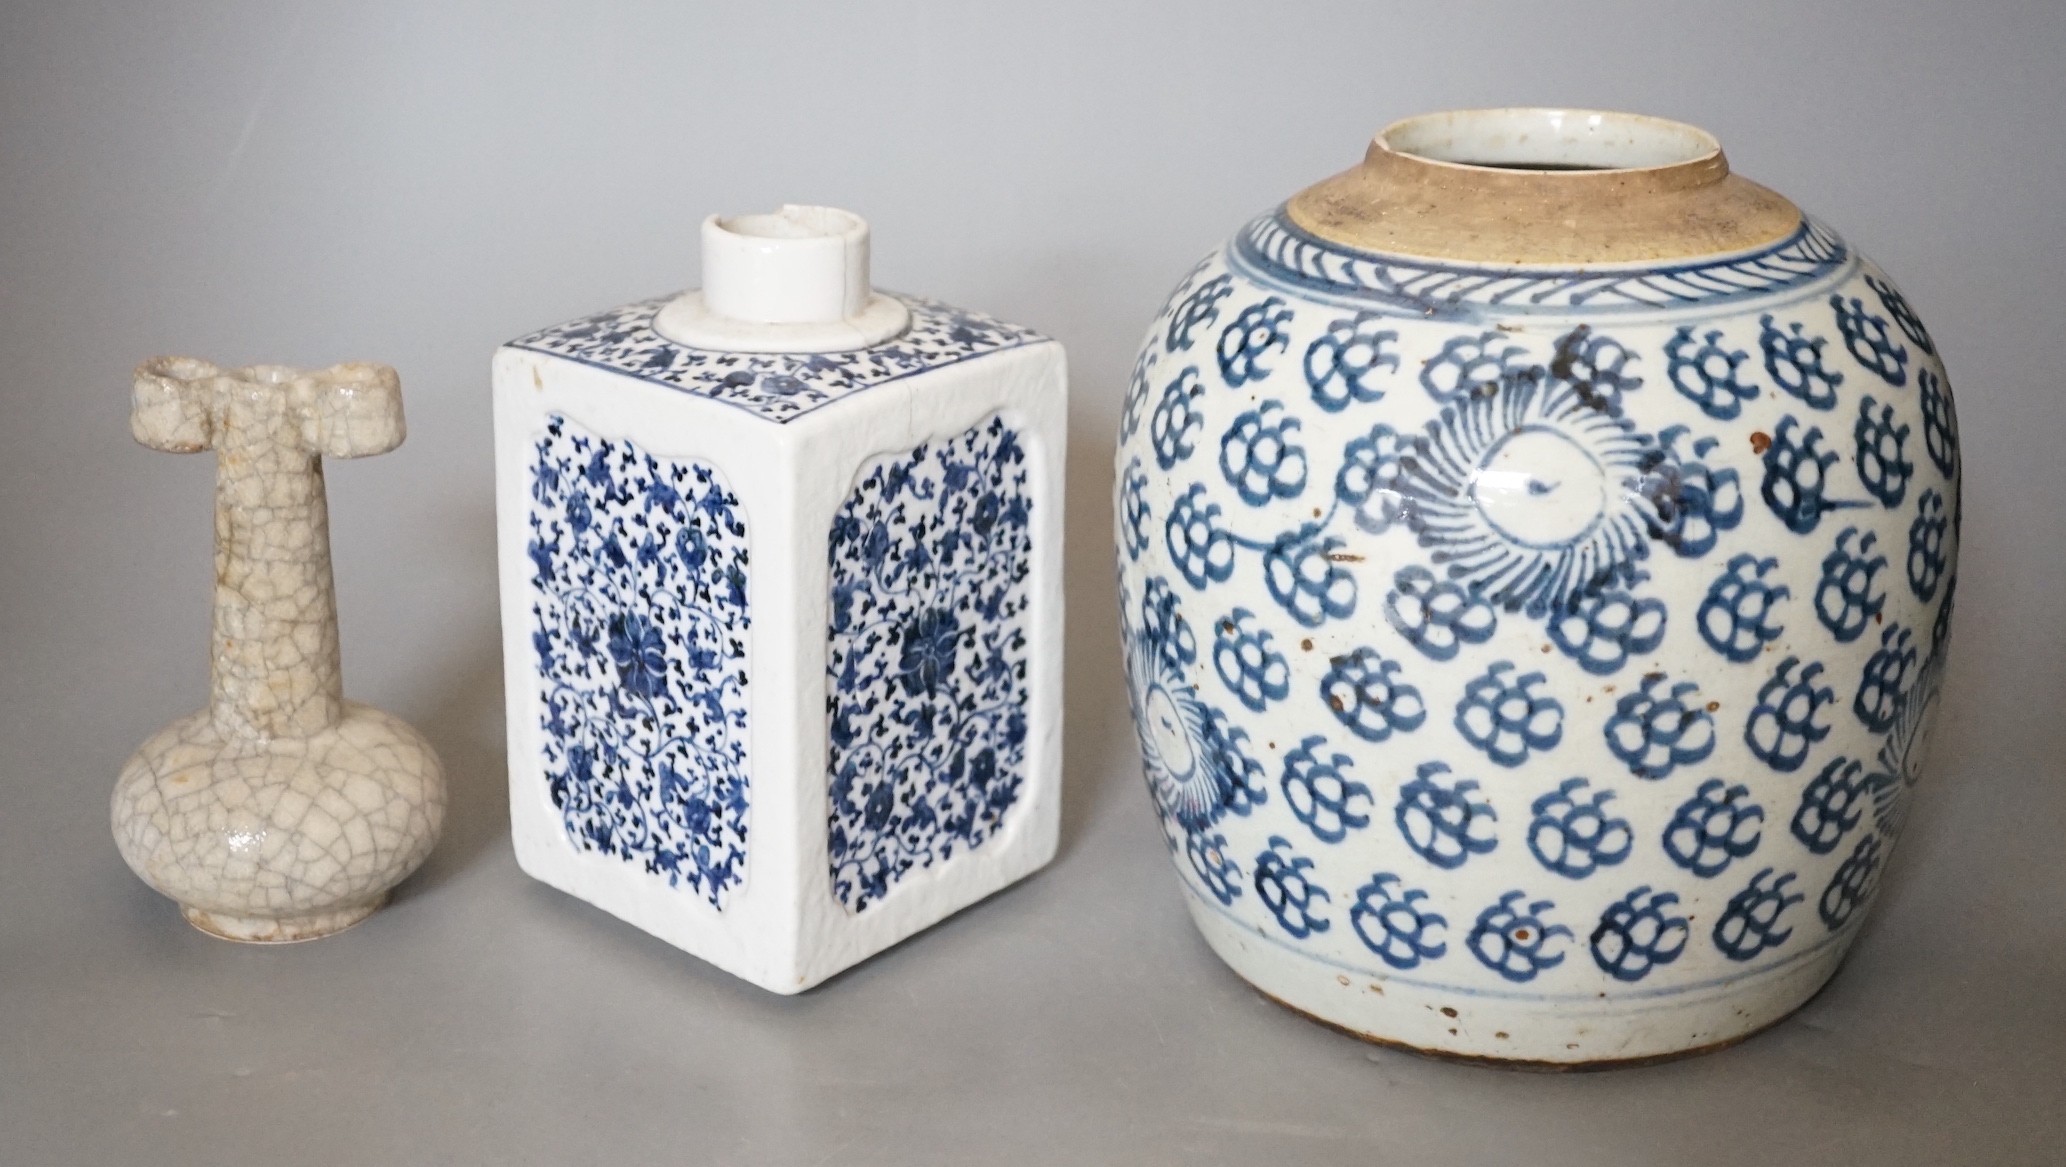 An 18th century Chinese provincial jar together with a tea canister and crackleglaze vase, tallest